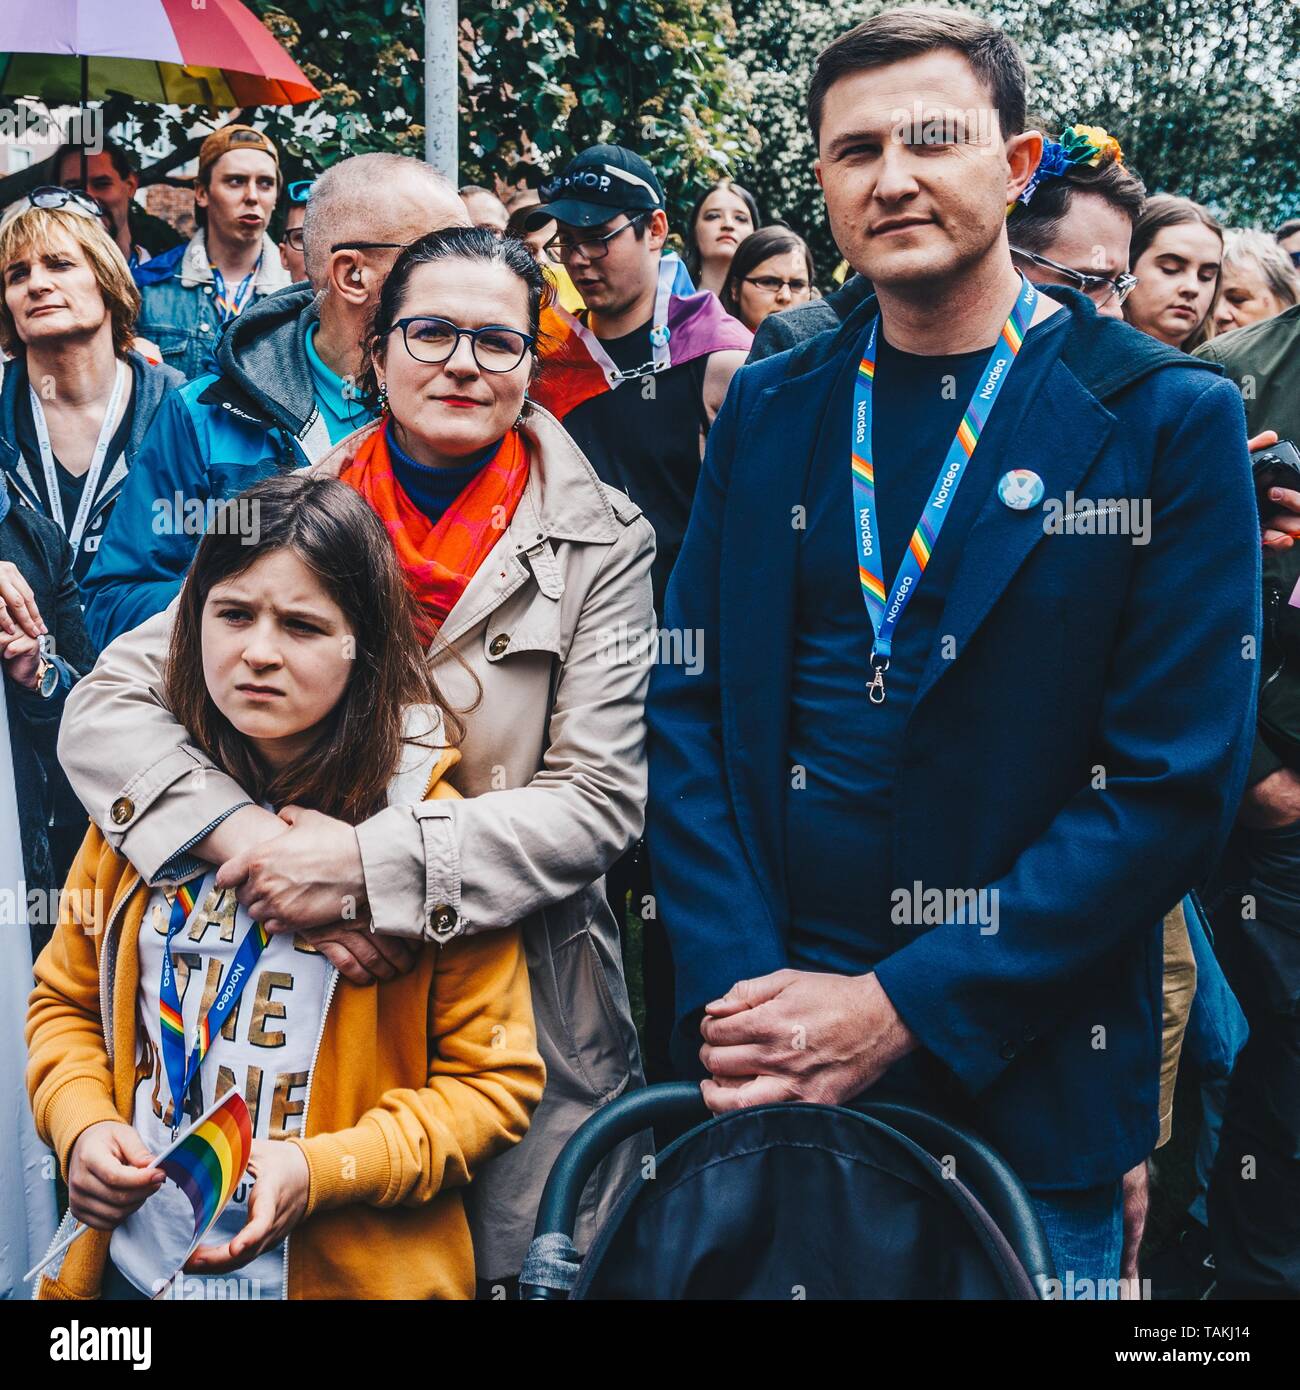 The 5th Tricity Equality March – Love can only combine, strolls through the streets on May 25, 2019 in Gdansk, Poland.   Current Mayor of Gdansk Aleks Stock Photo